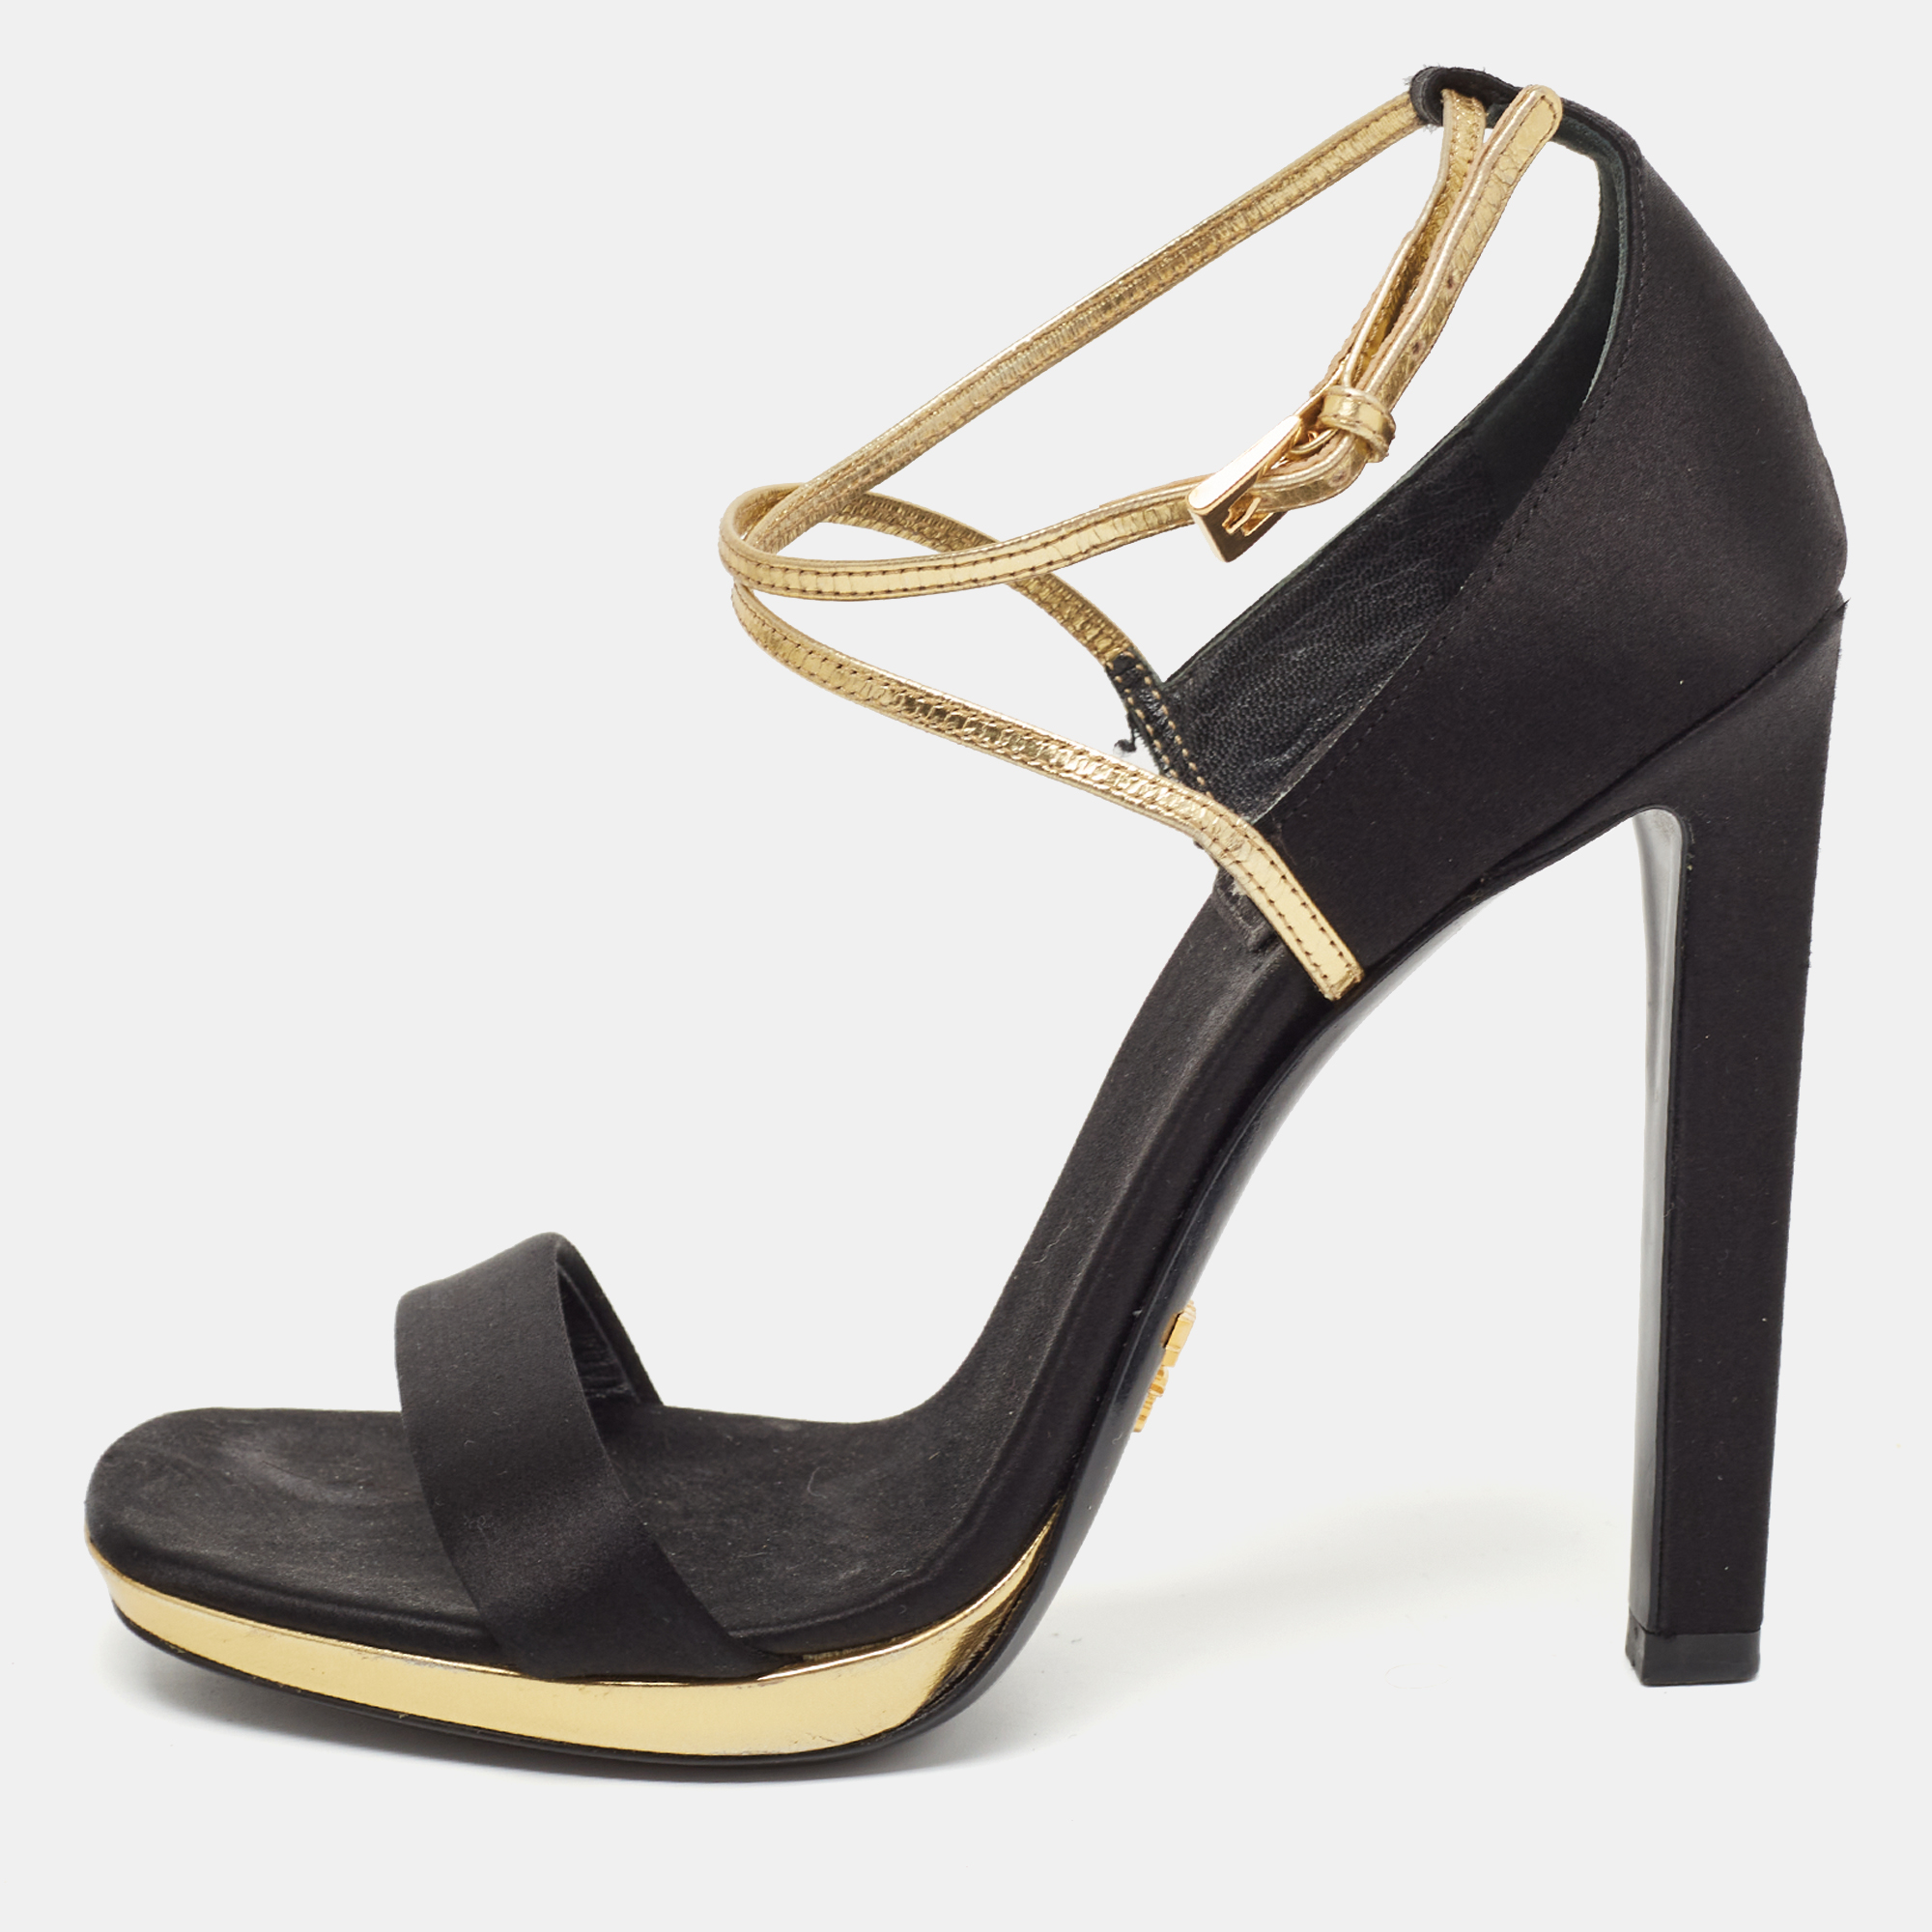 These modish Prada sandals will elevate you and your outfit with ease. Crafted from black satin they come with gold leather criss cross straps and buckle fastenings. Theyre set on 13cm heels.